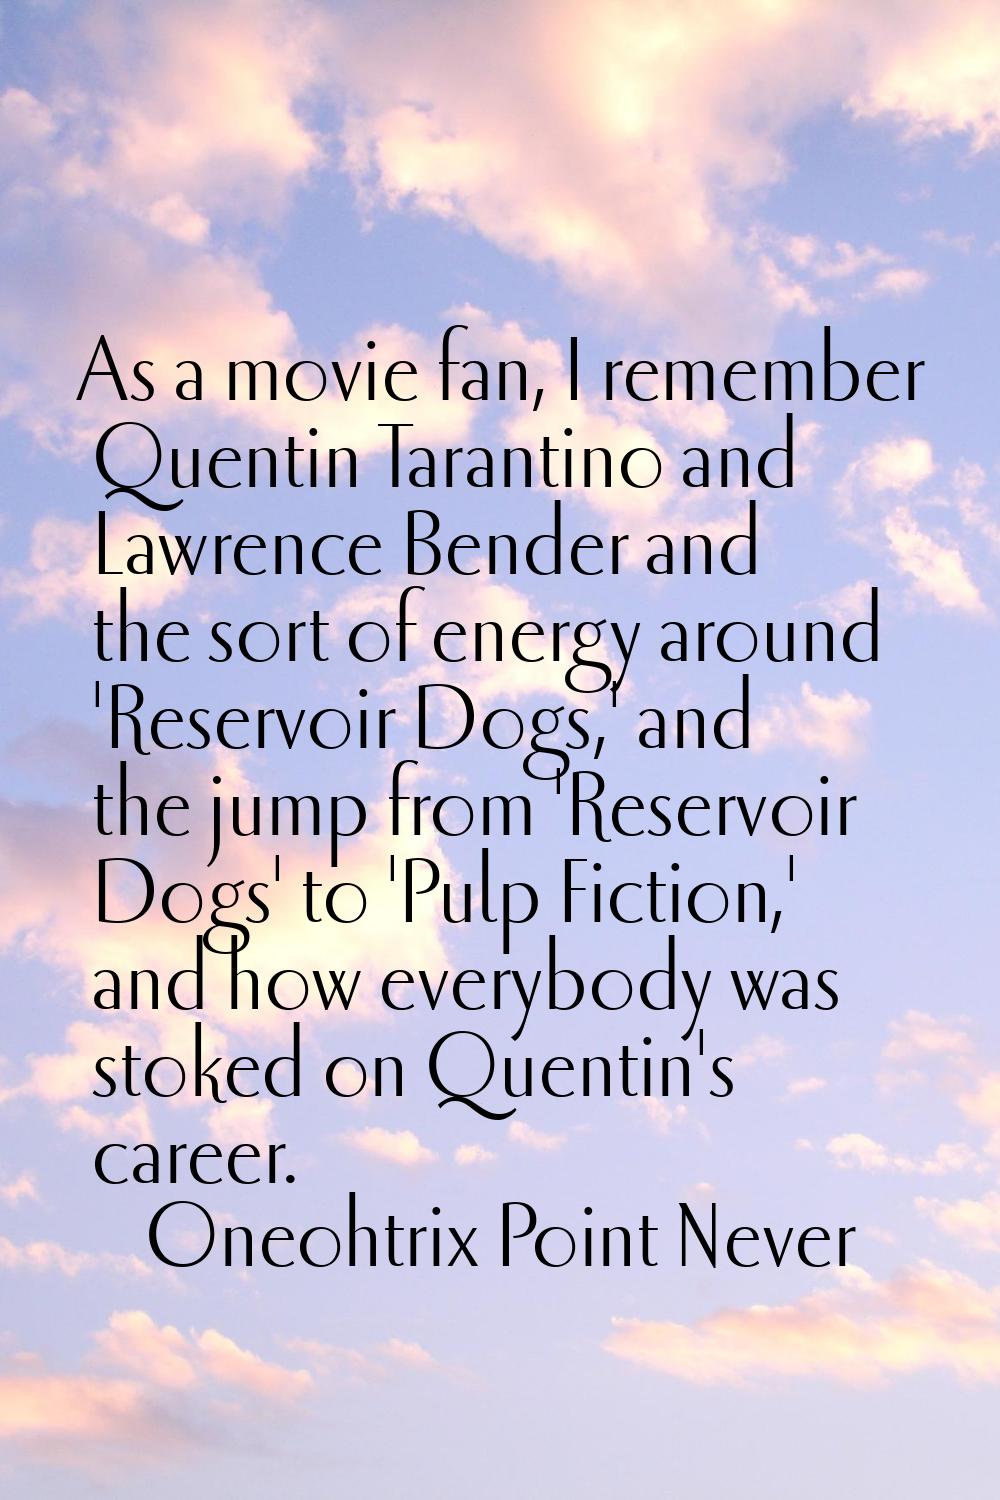 As a movie fan, I remember Quentin Tarantino and Lawrence Bender and the sort of energy around 'Res